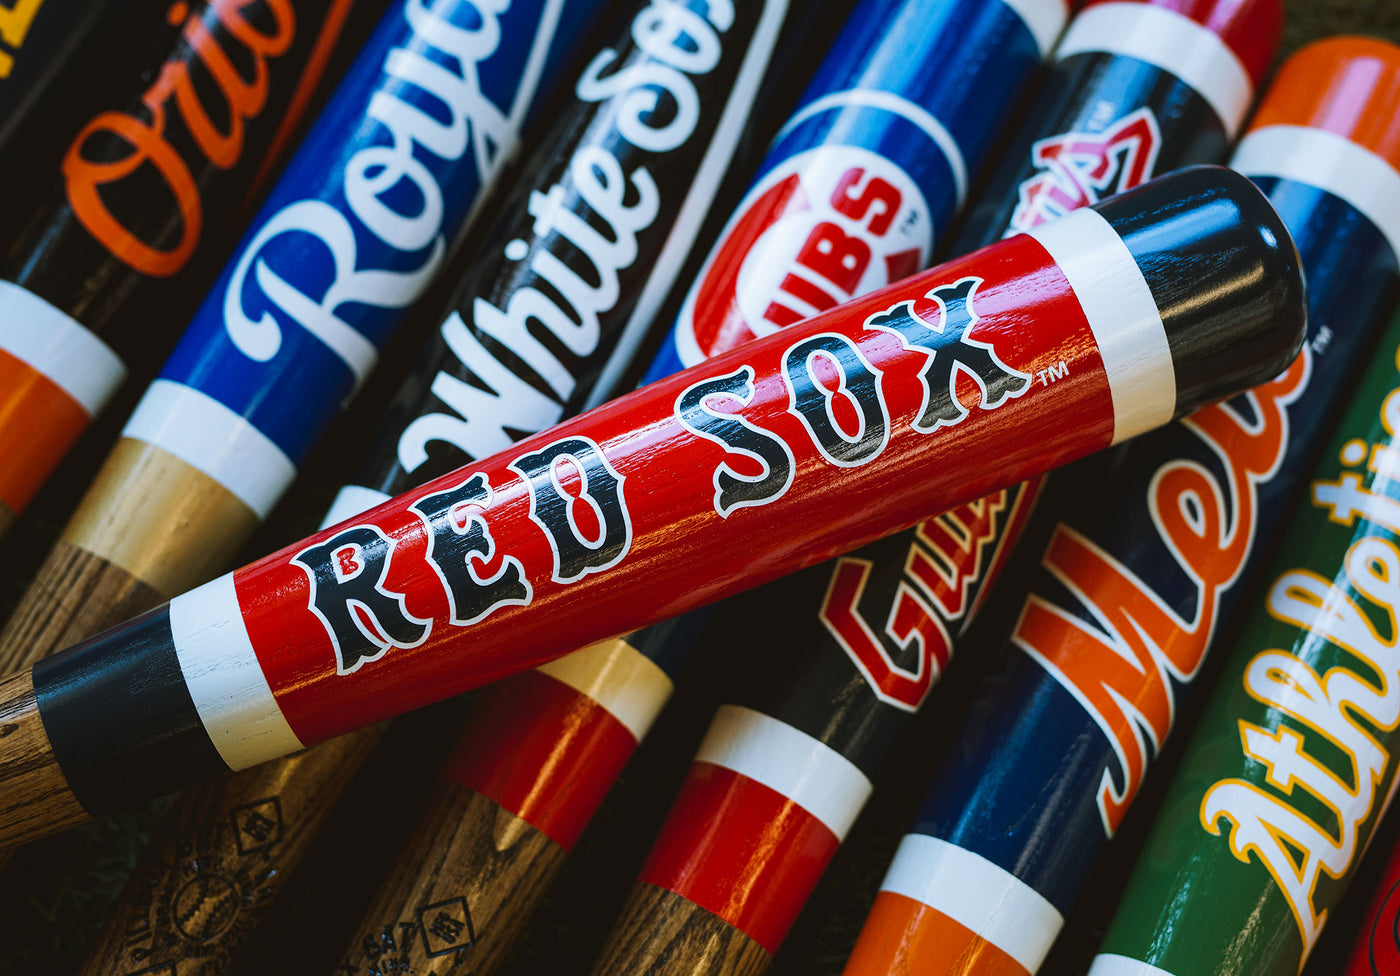 BOSTON RED SOX COLLECTION – Pillbox Bat Co.